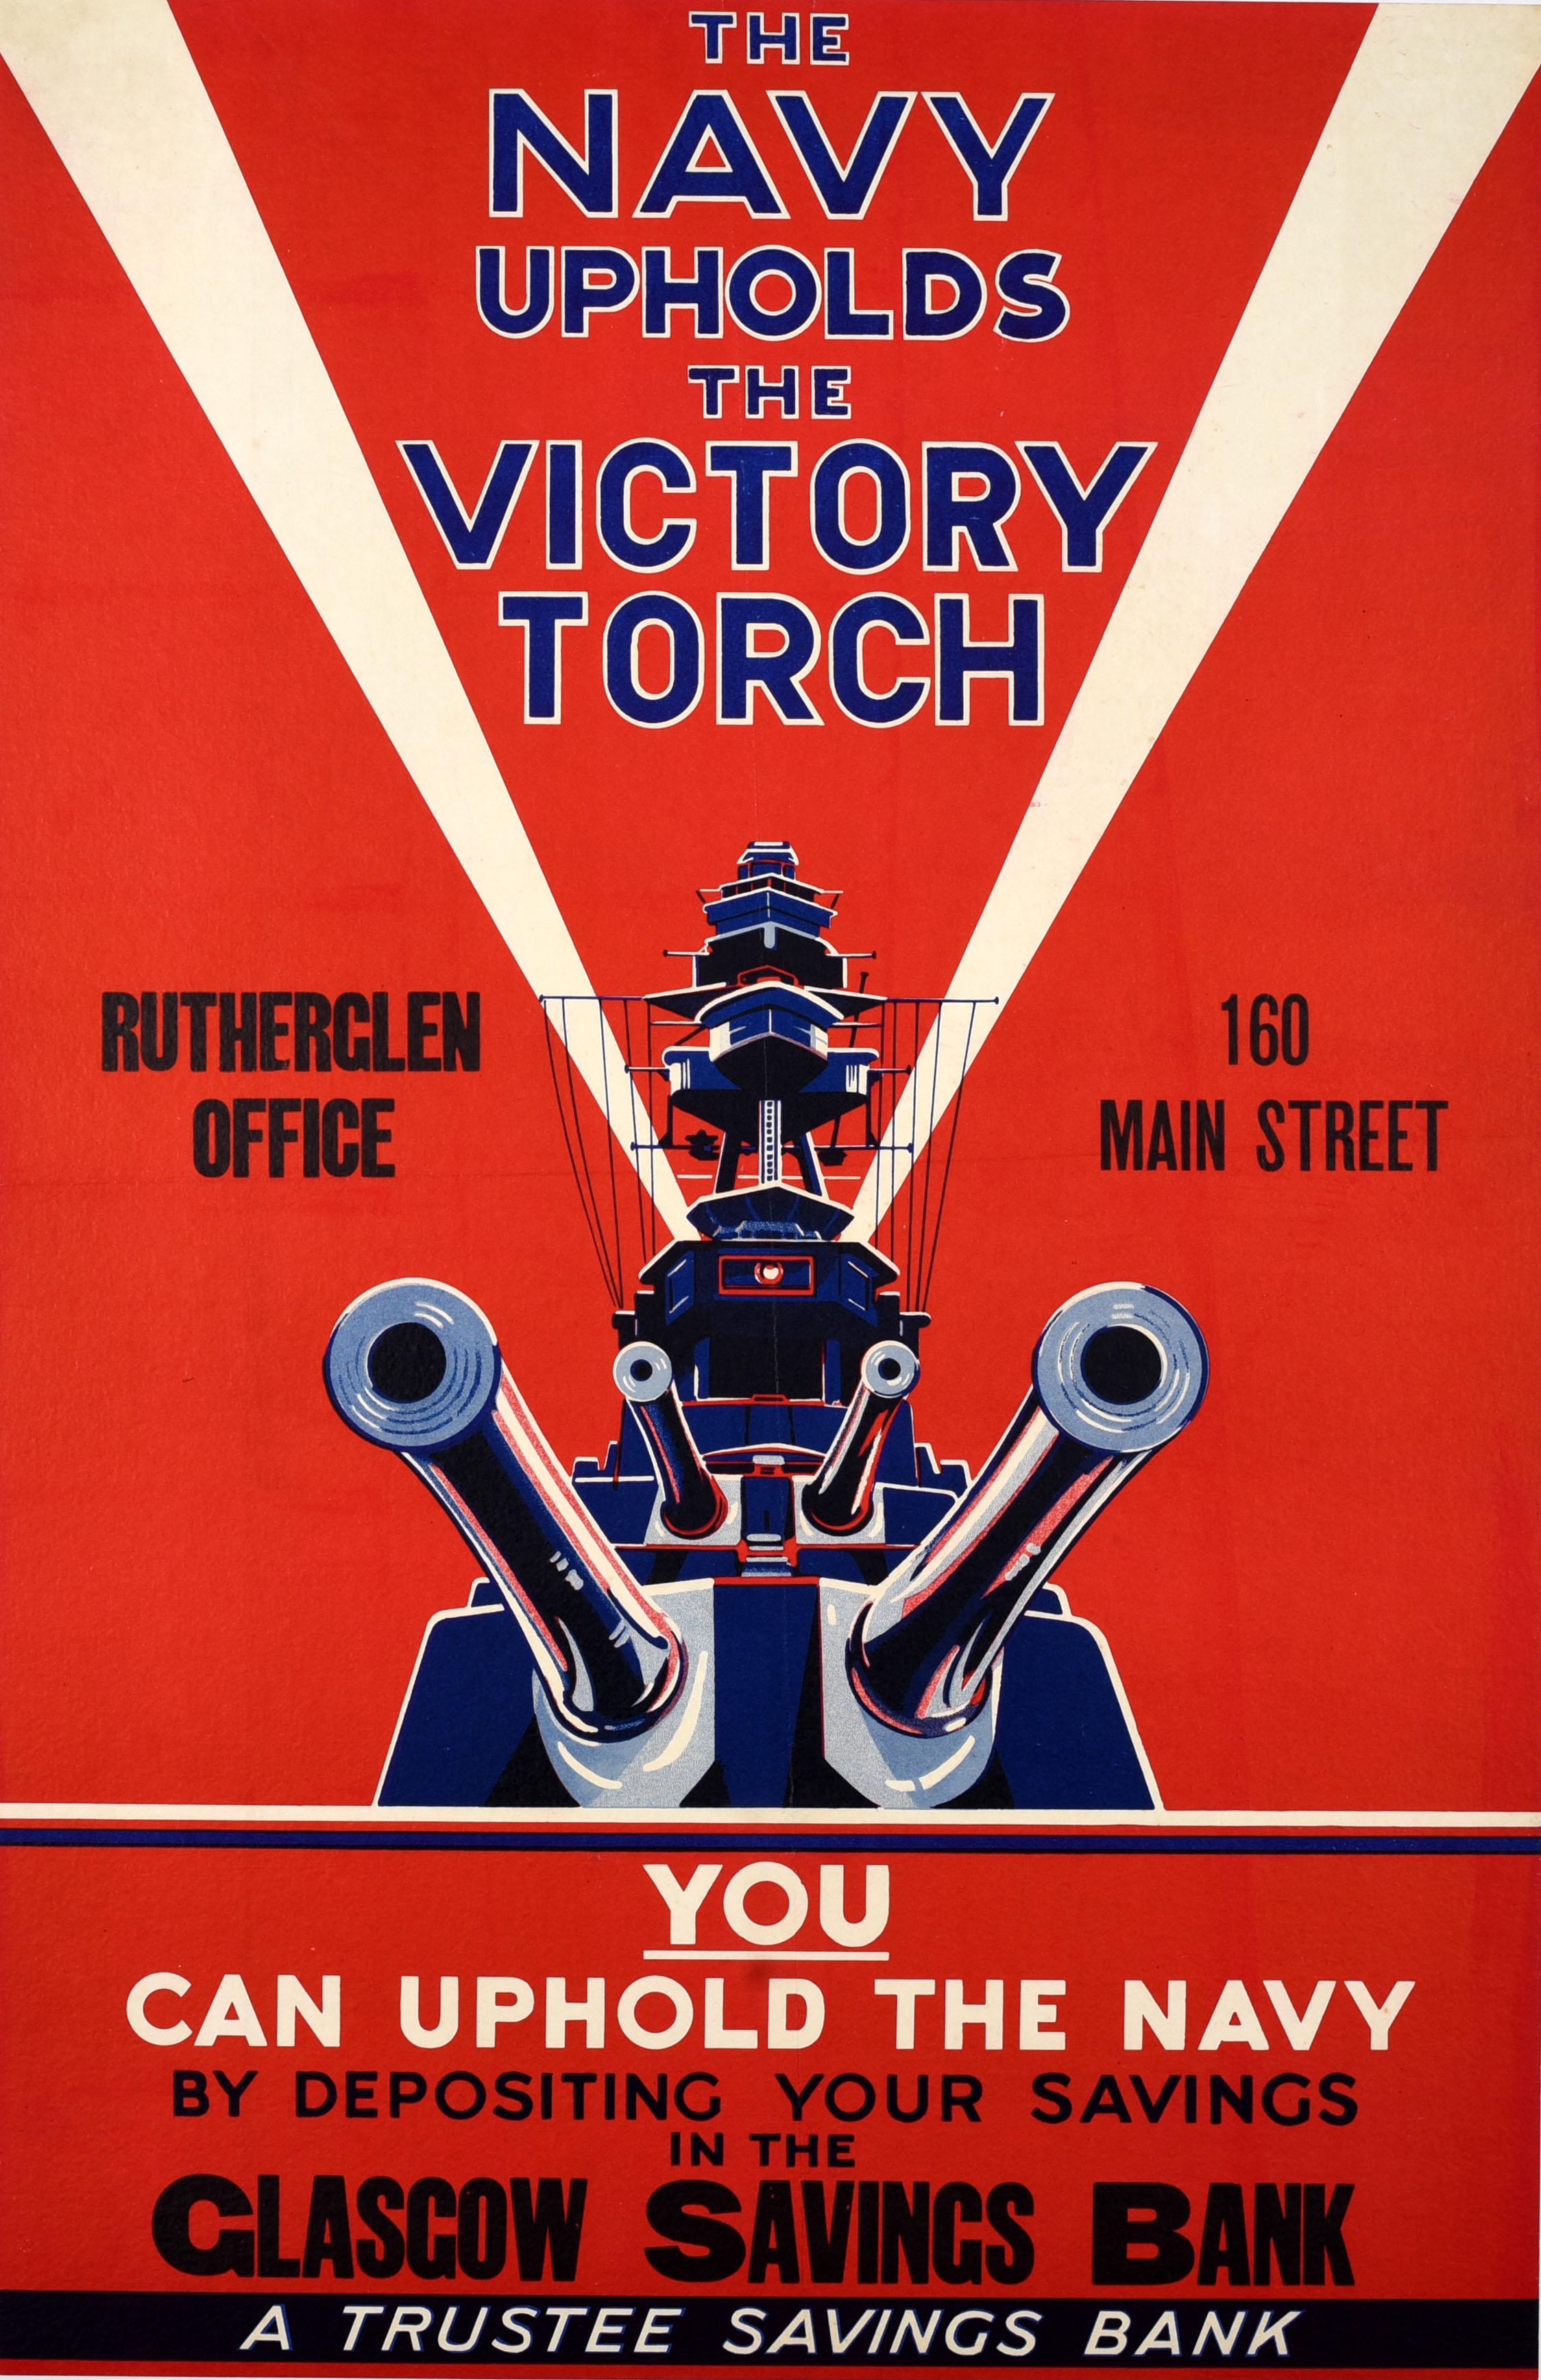 Unknown Print - Original Vintage World War Two Propaganda Poster Navy Upholds Victory Torch WWII